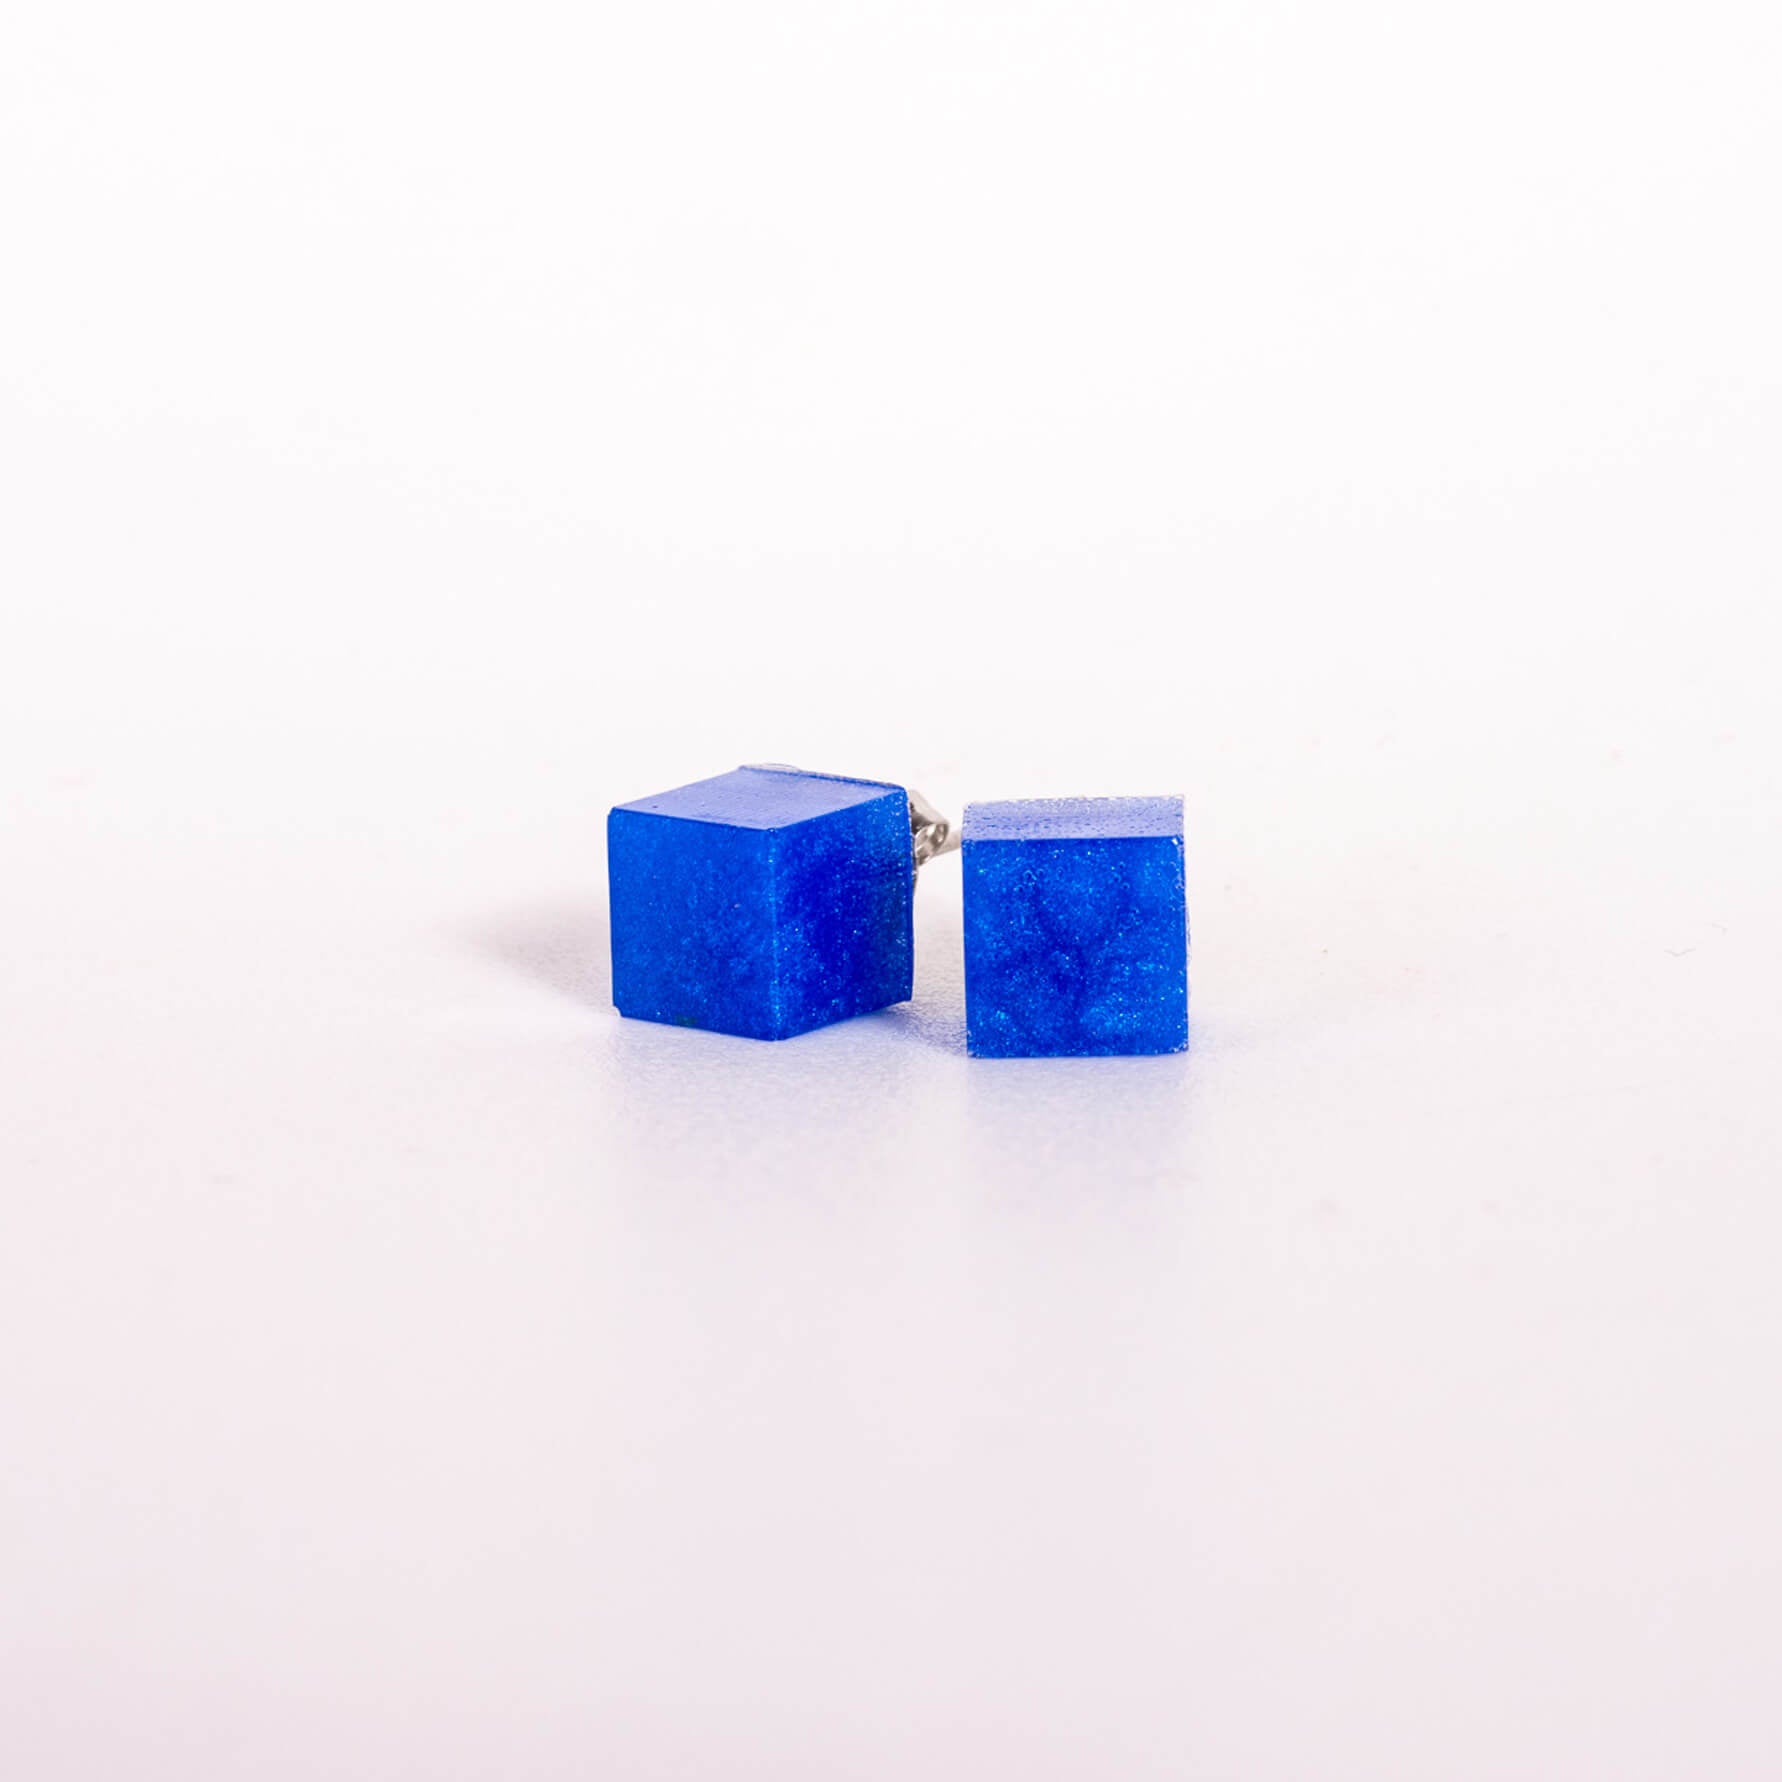 royal blue cube earrings with hypo allergenic steel posts